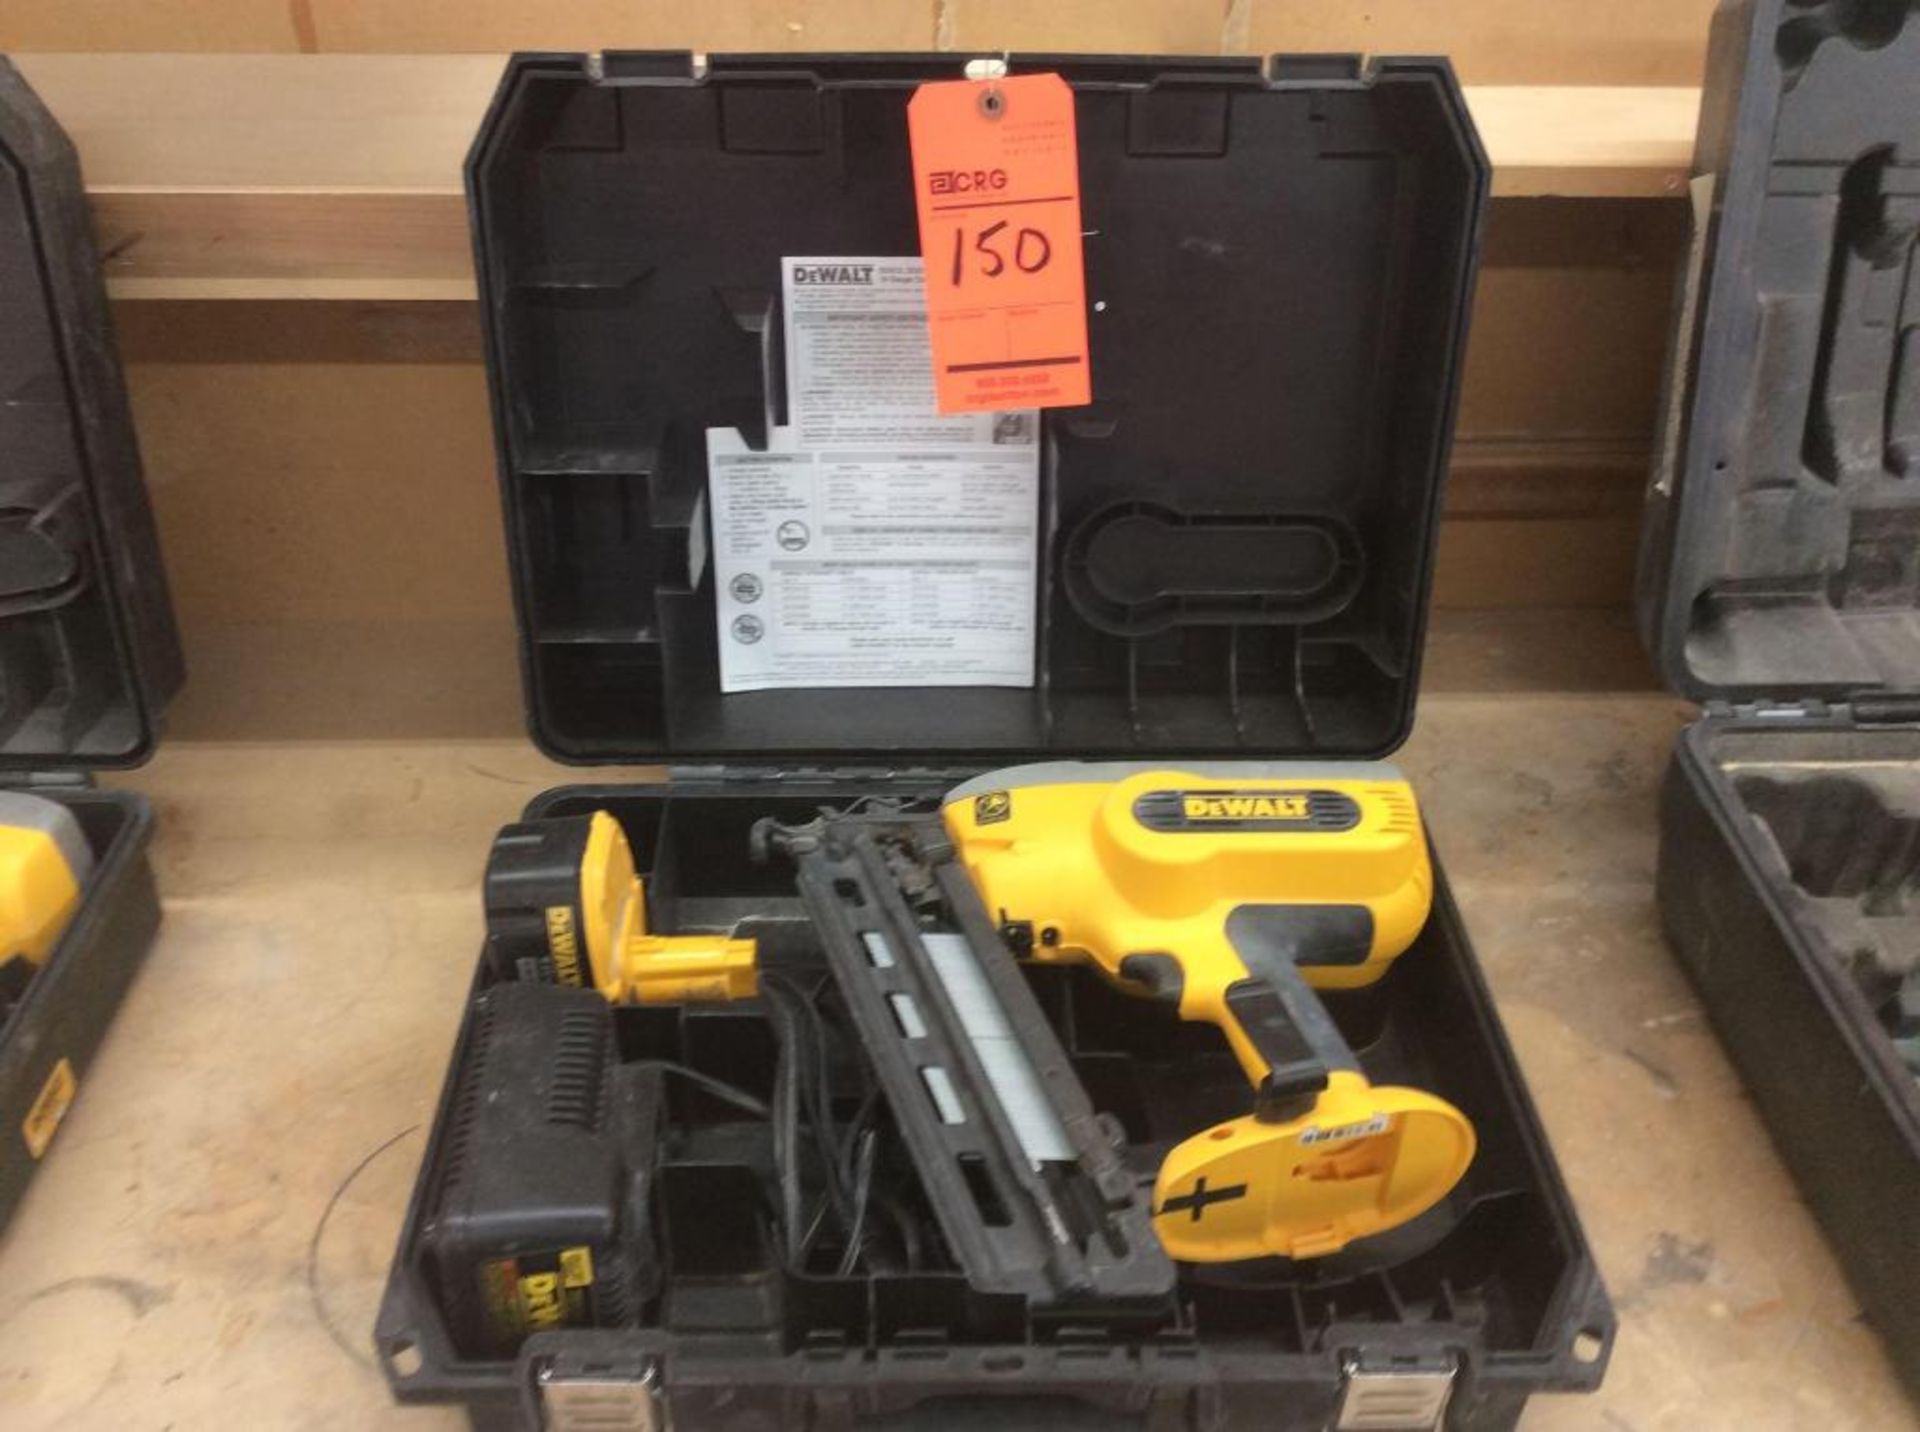 Dewalt cordless battery operated finish nailer, mn DC618 18 volt battery and charger with case